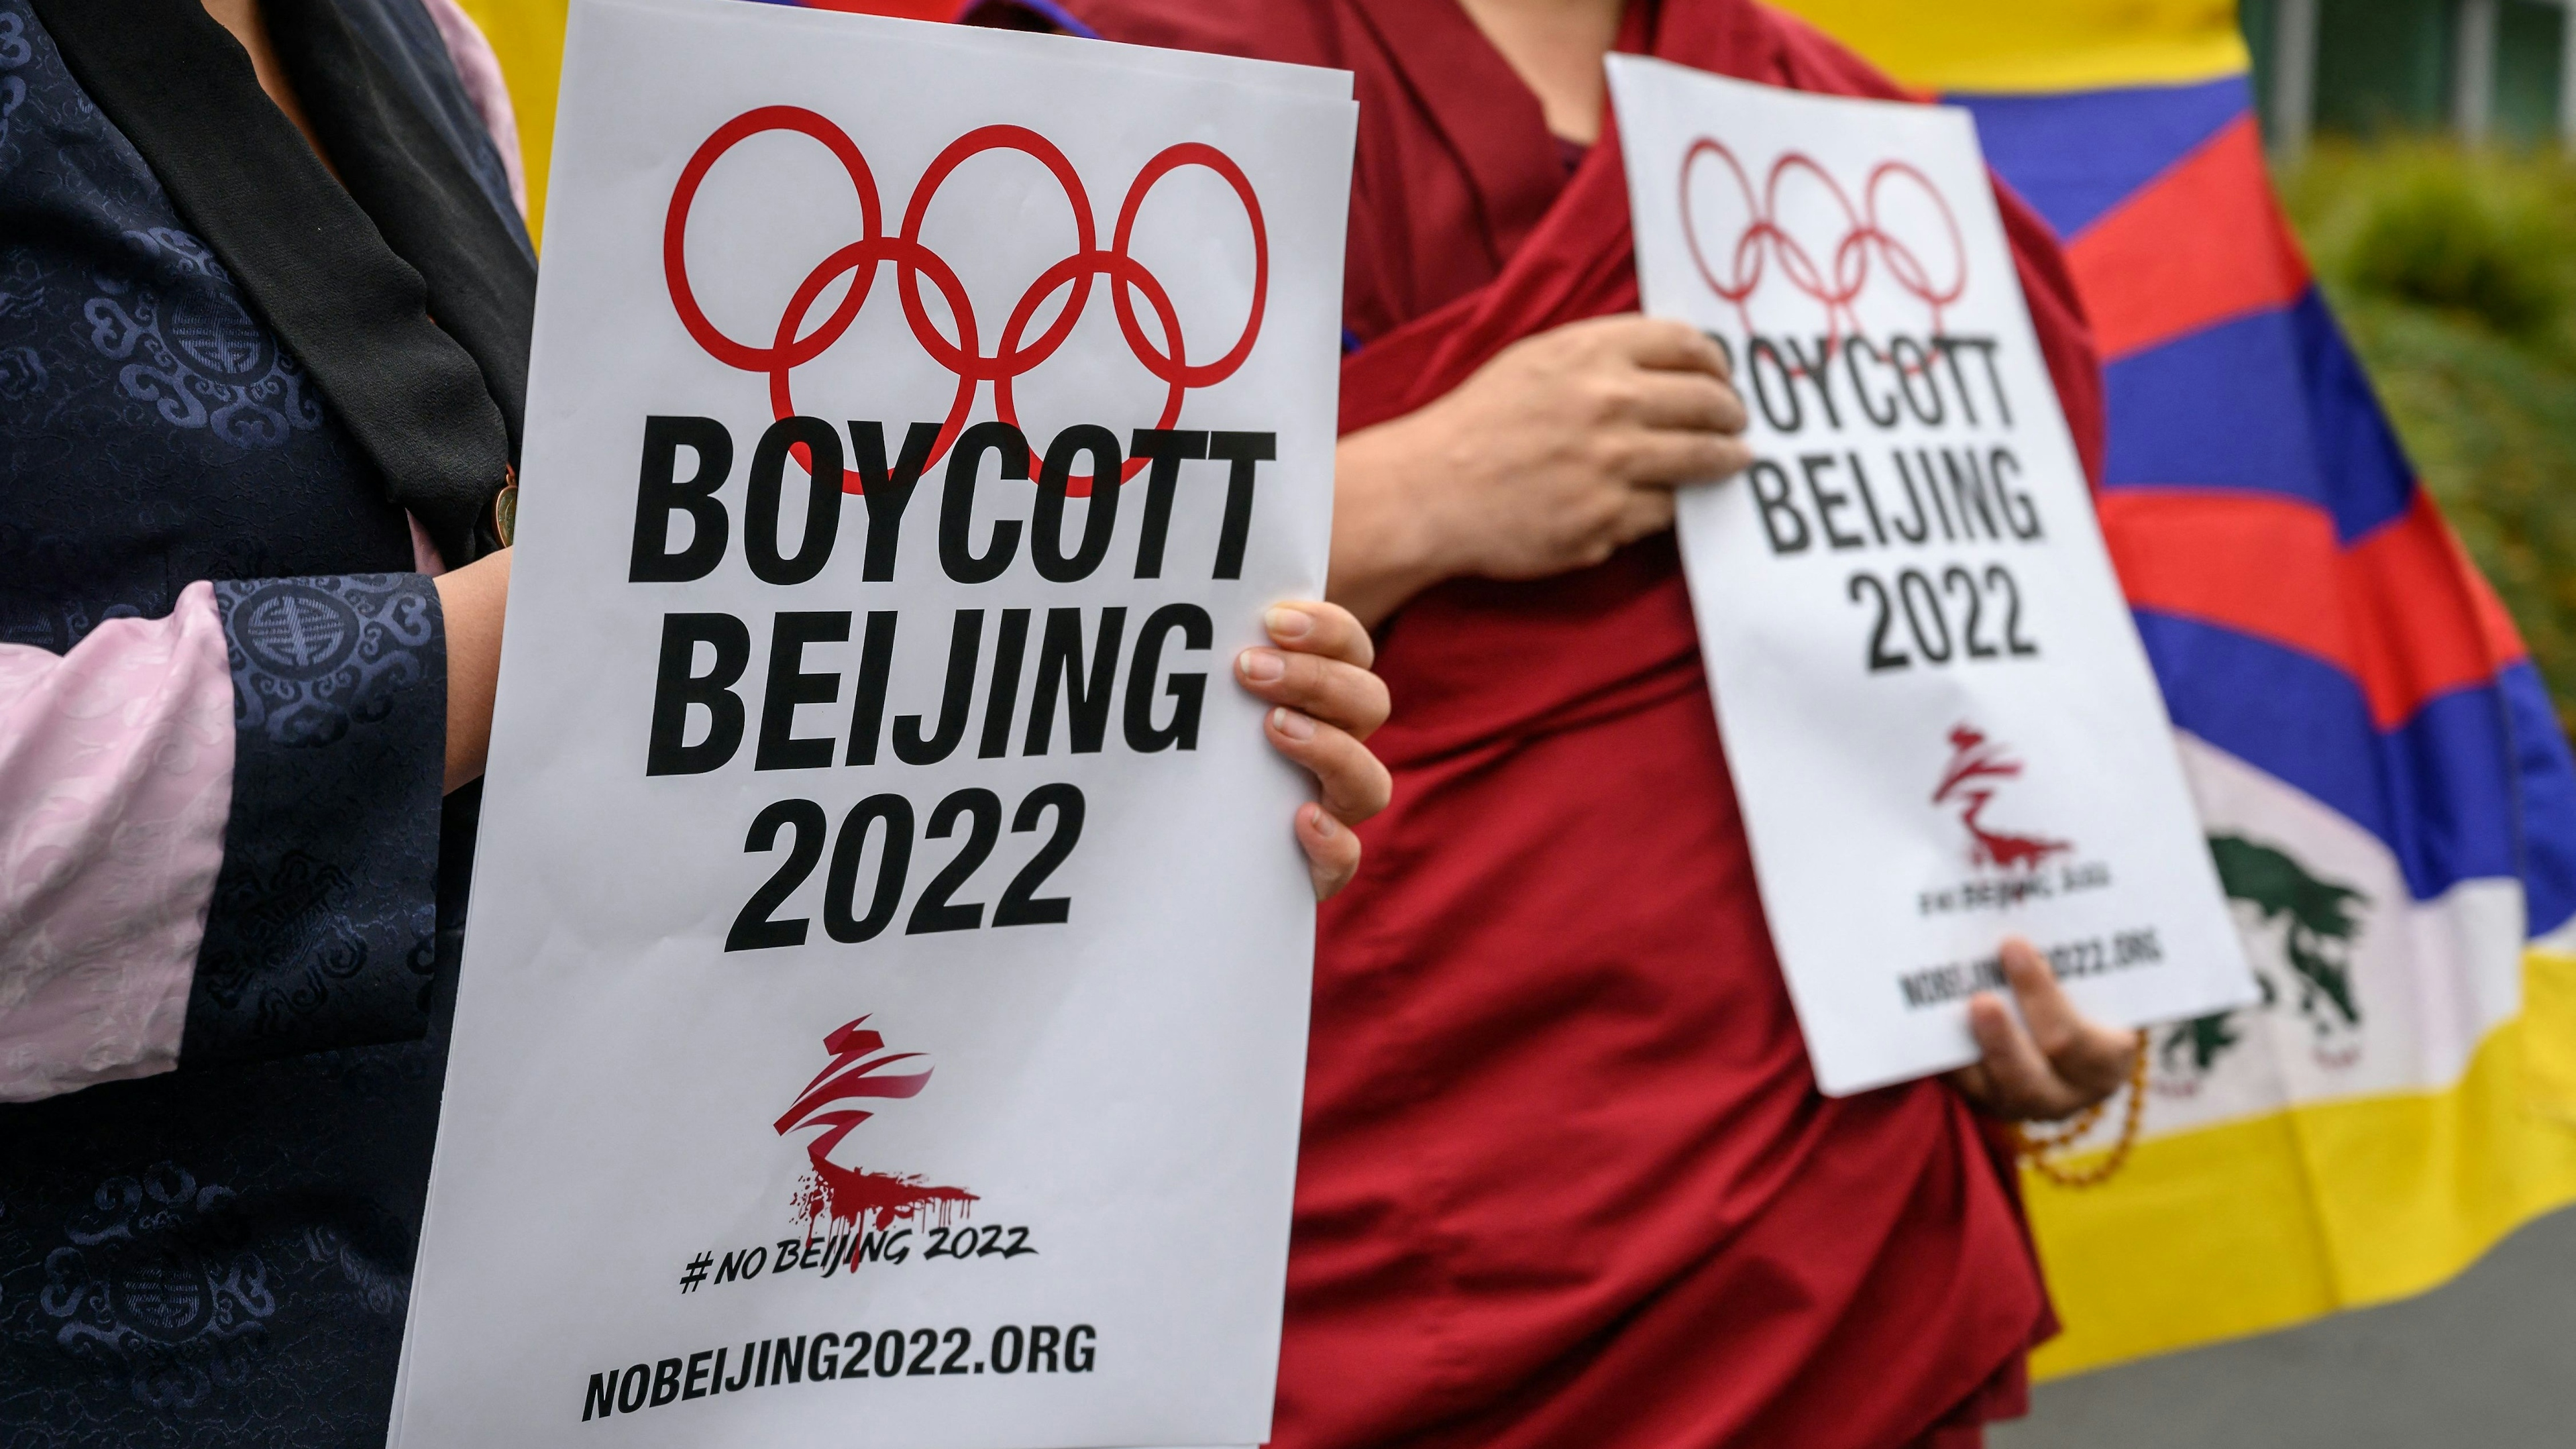 Tibetan activists stand in front of the International Olympic Committee (IOC) headquarters during a protest ahead of the February's Beijing 2022 Winter Olympics